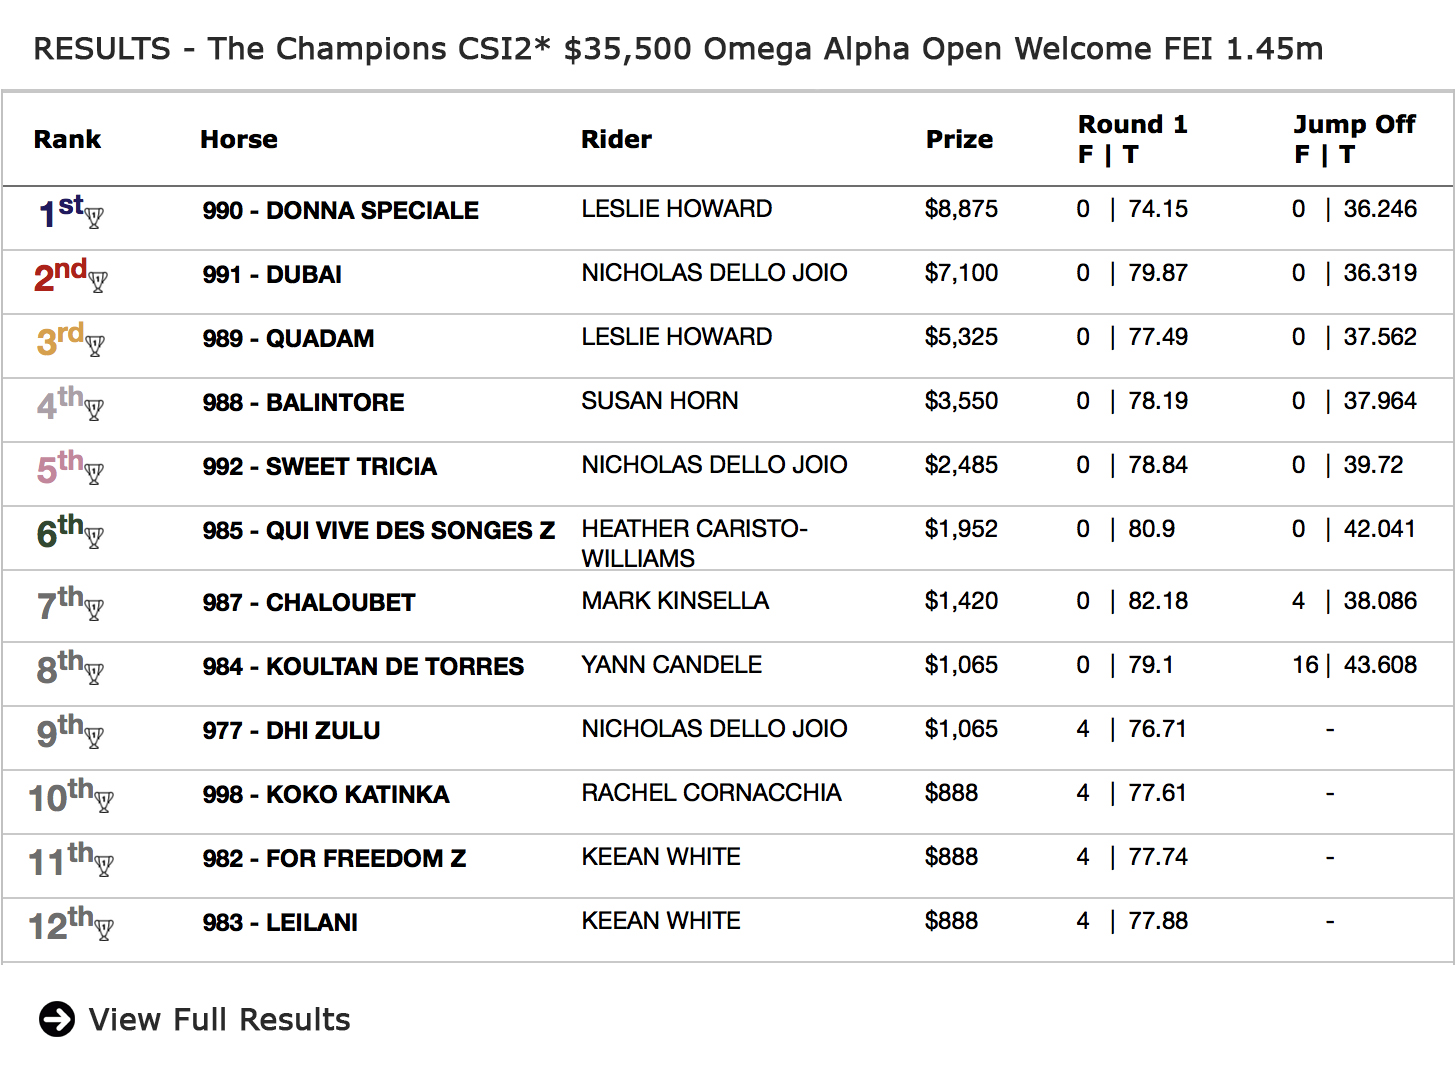 Results of The Champions $35,500 Omega Alpha Open Welcome FEI